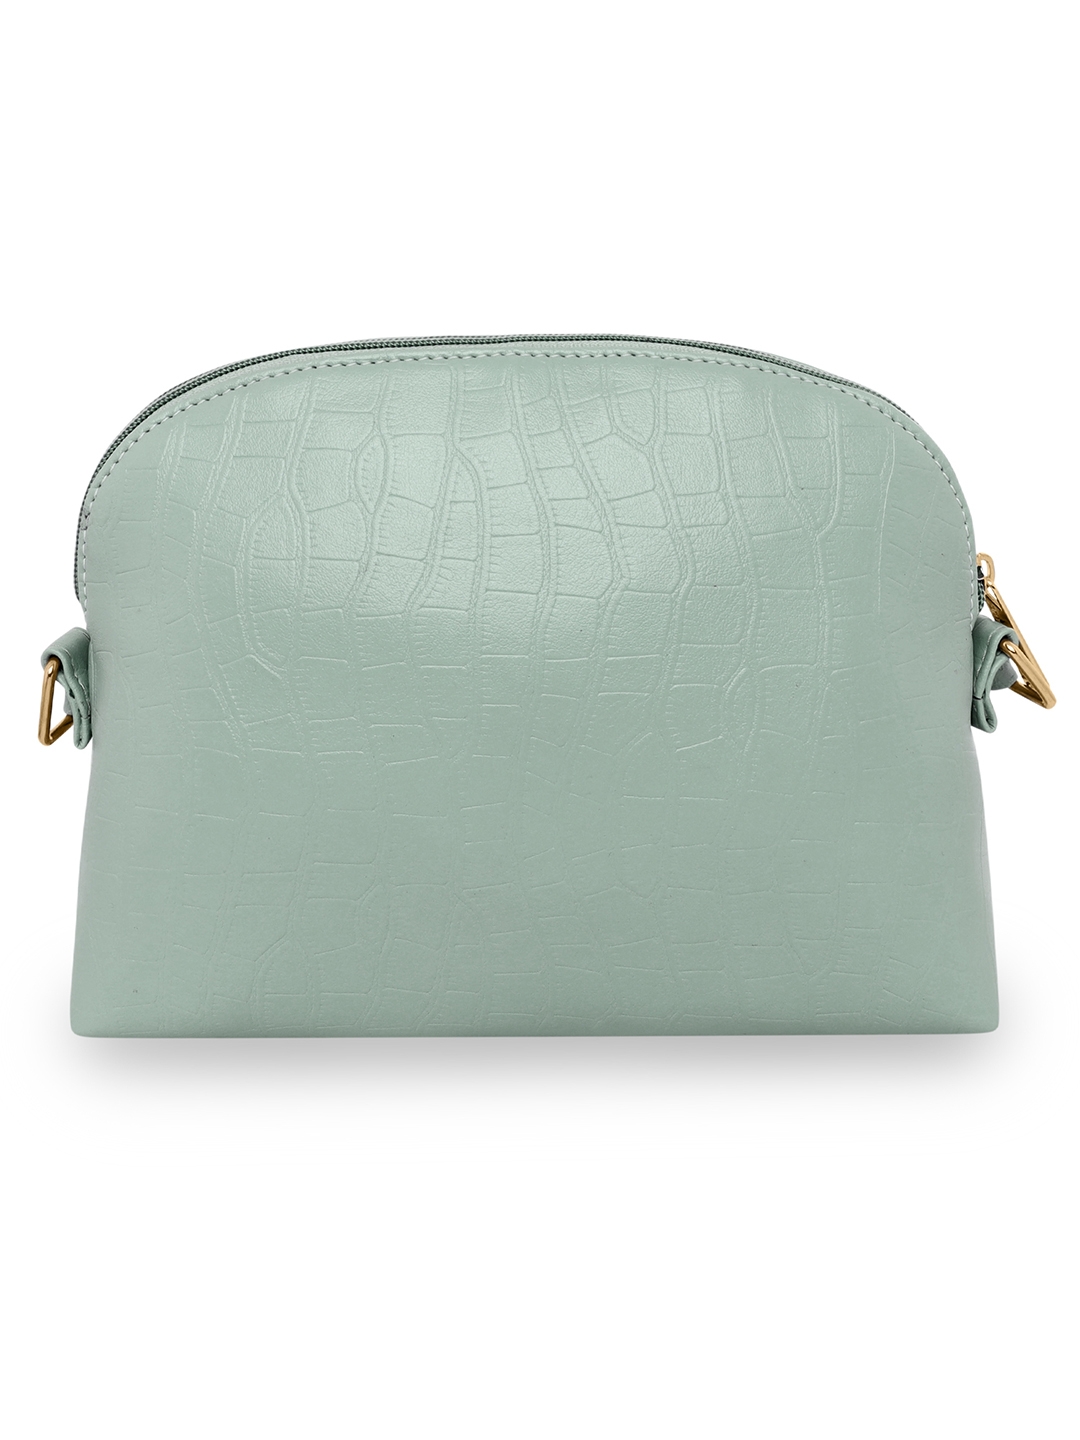 Aeropostale | Aeropostale Textured Kylie PU Sling Bag with non-detachable strap (Green) 2